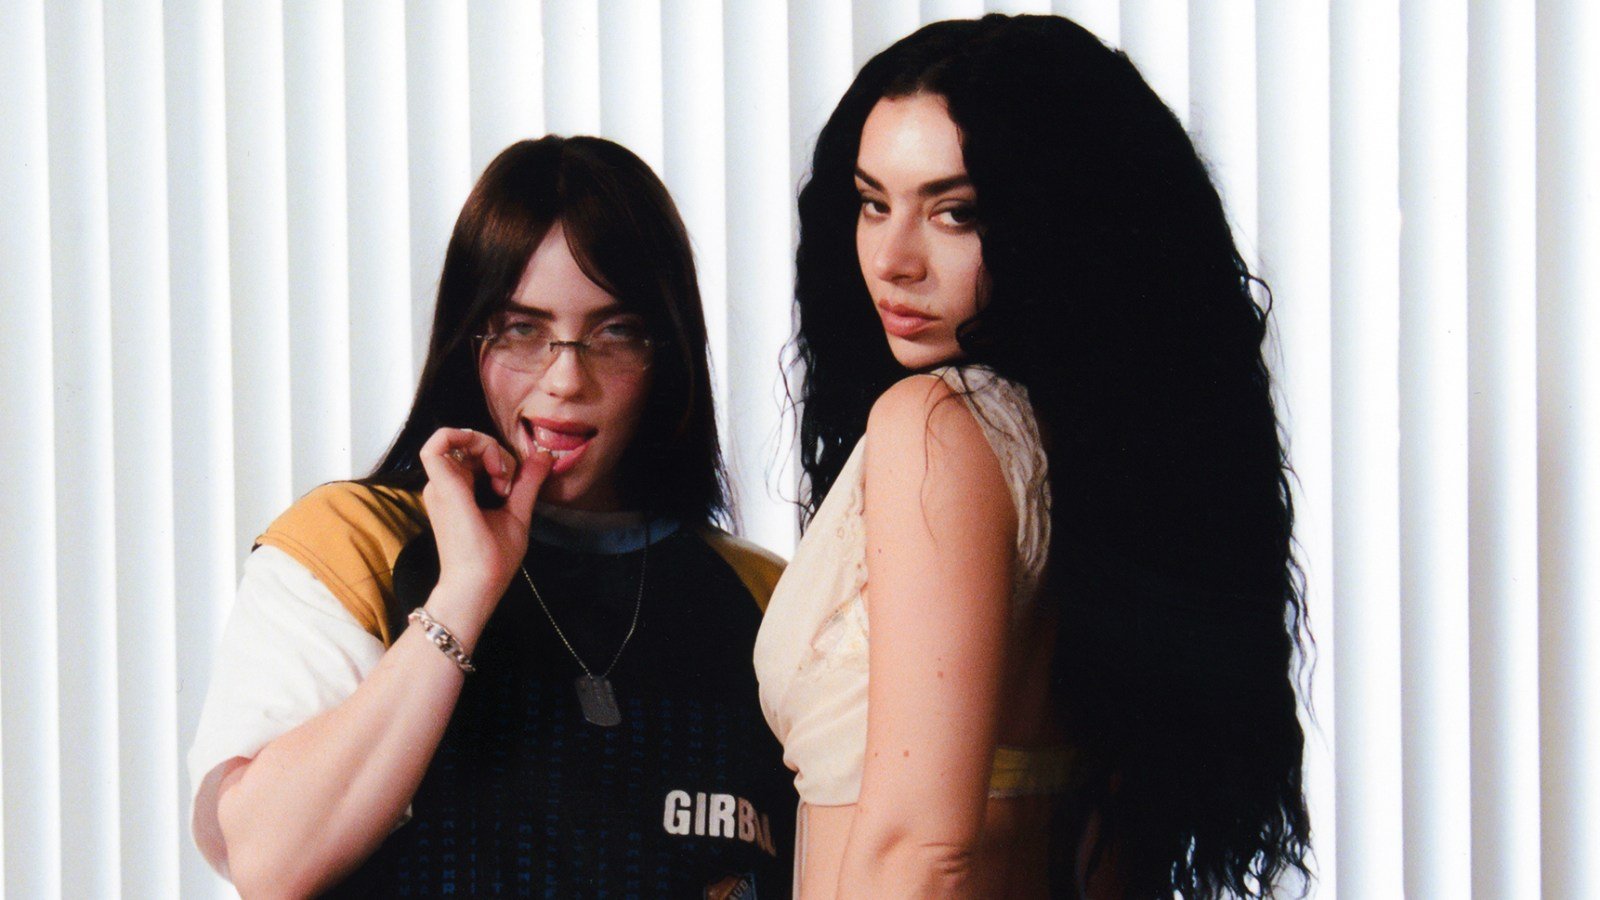 Charli XCX, Billie Eilish, A$AP Rocky, Khalid, and All the Songs You Need to Know This Week